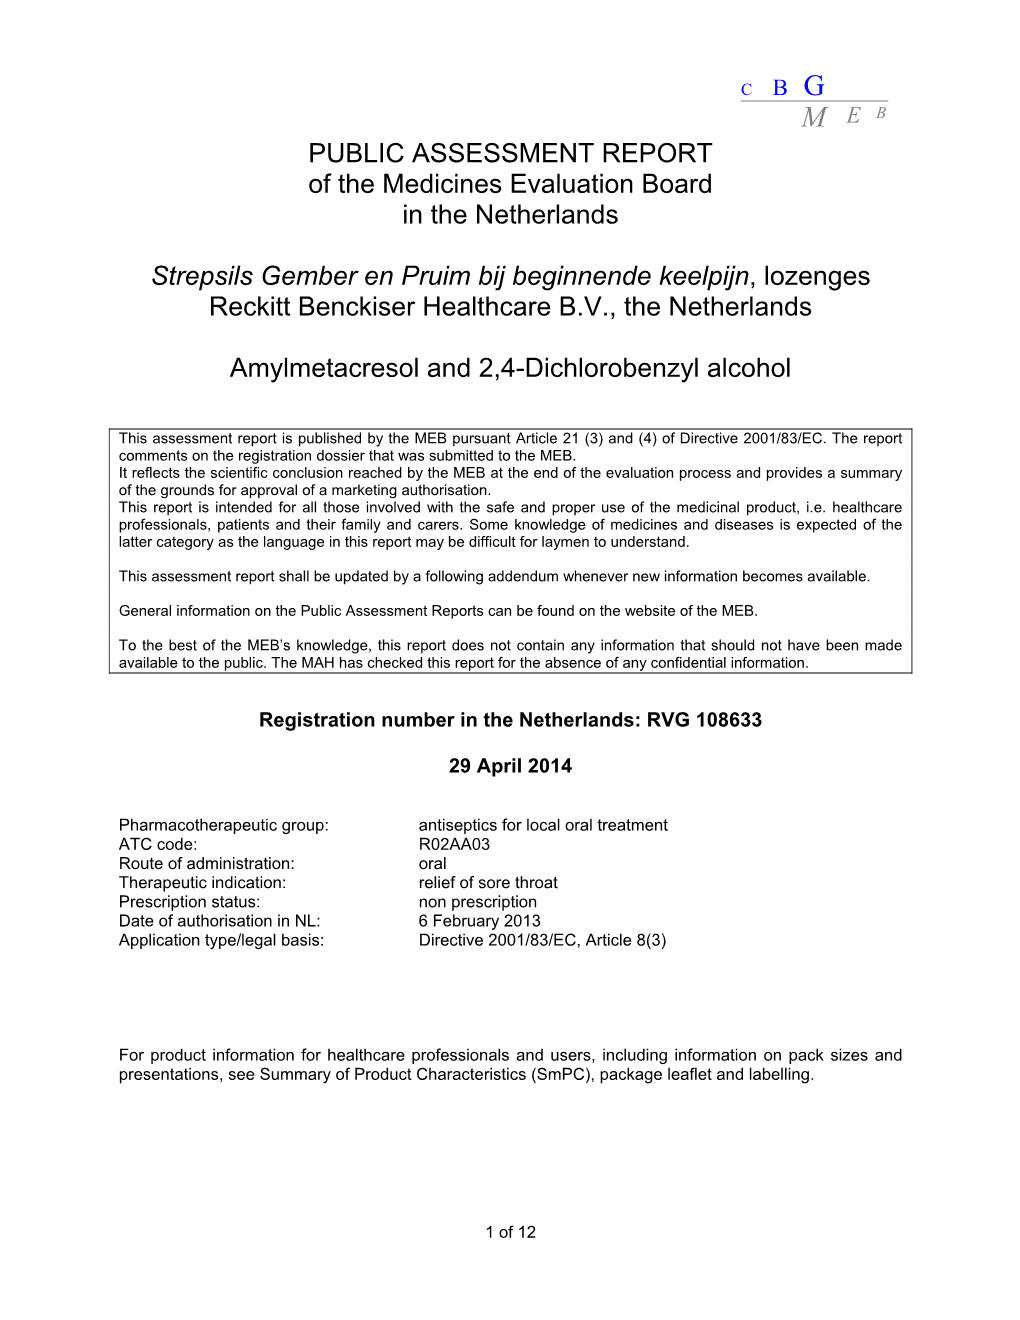 PUBLIC ASSESSMENT REPORT of the Medicines Evaluation Board in the Netherlands